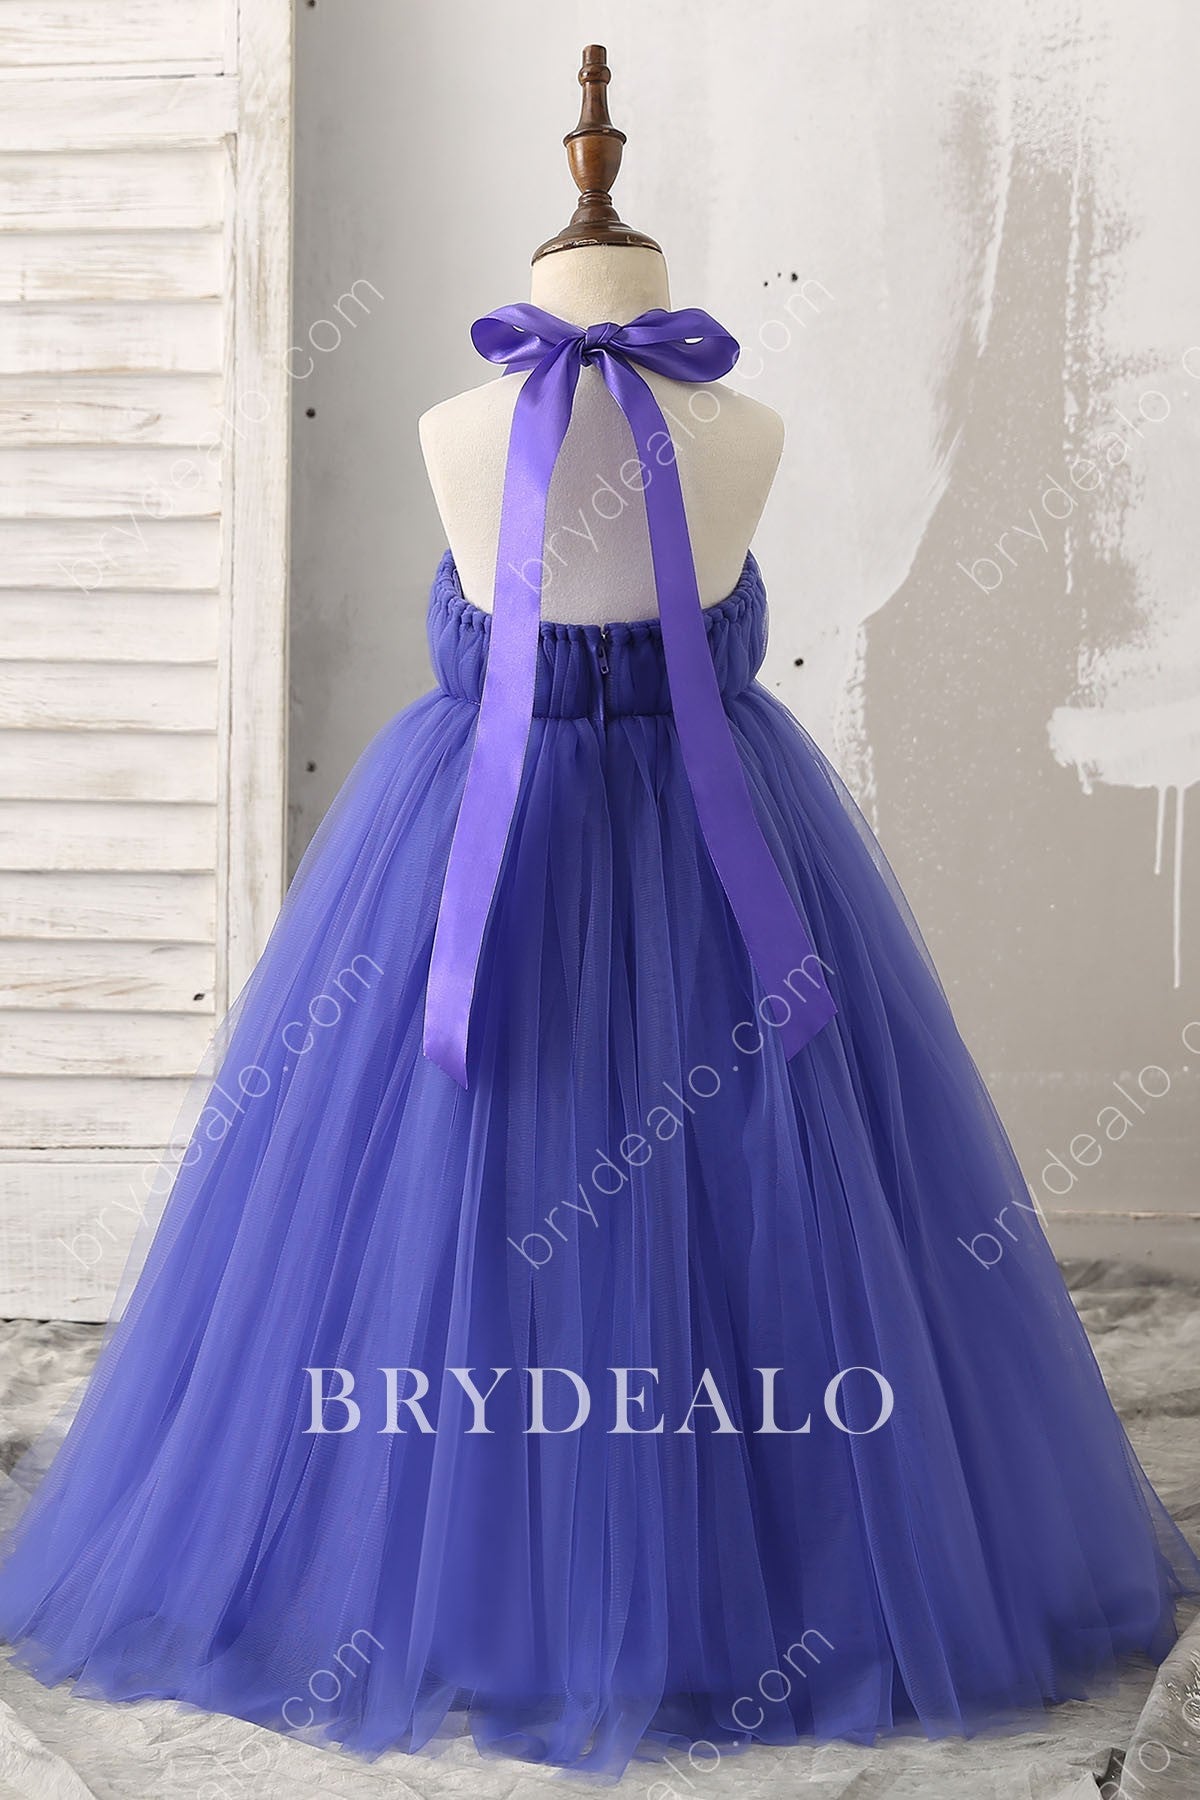 Tie Bow Royal Blue Flower Girl Ball Gown